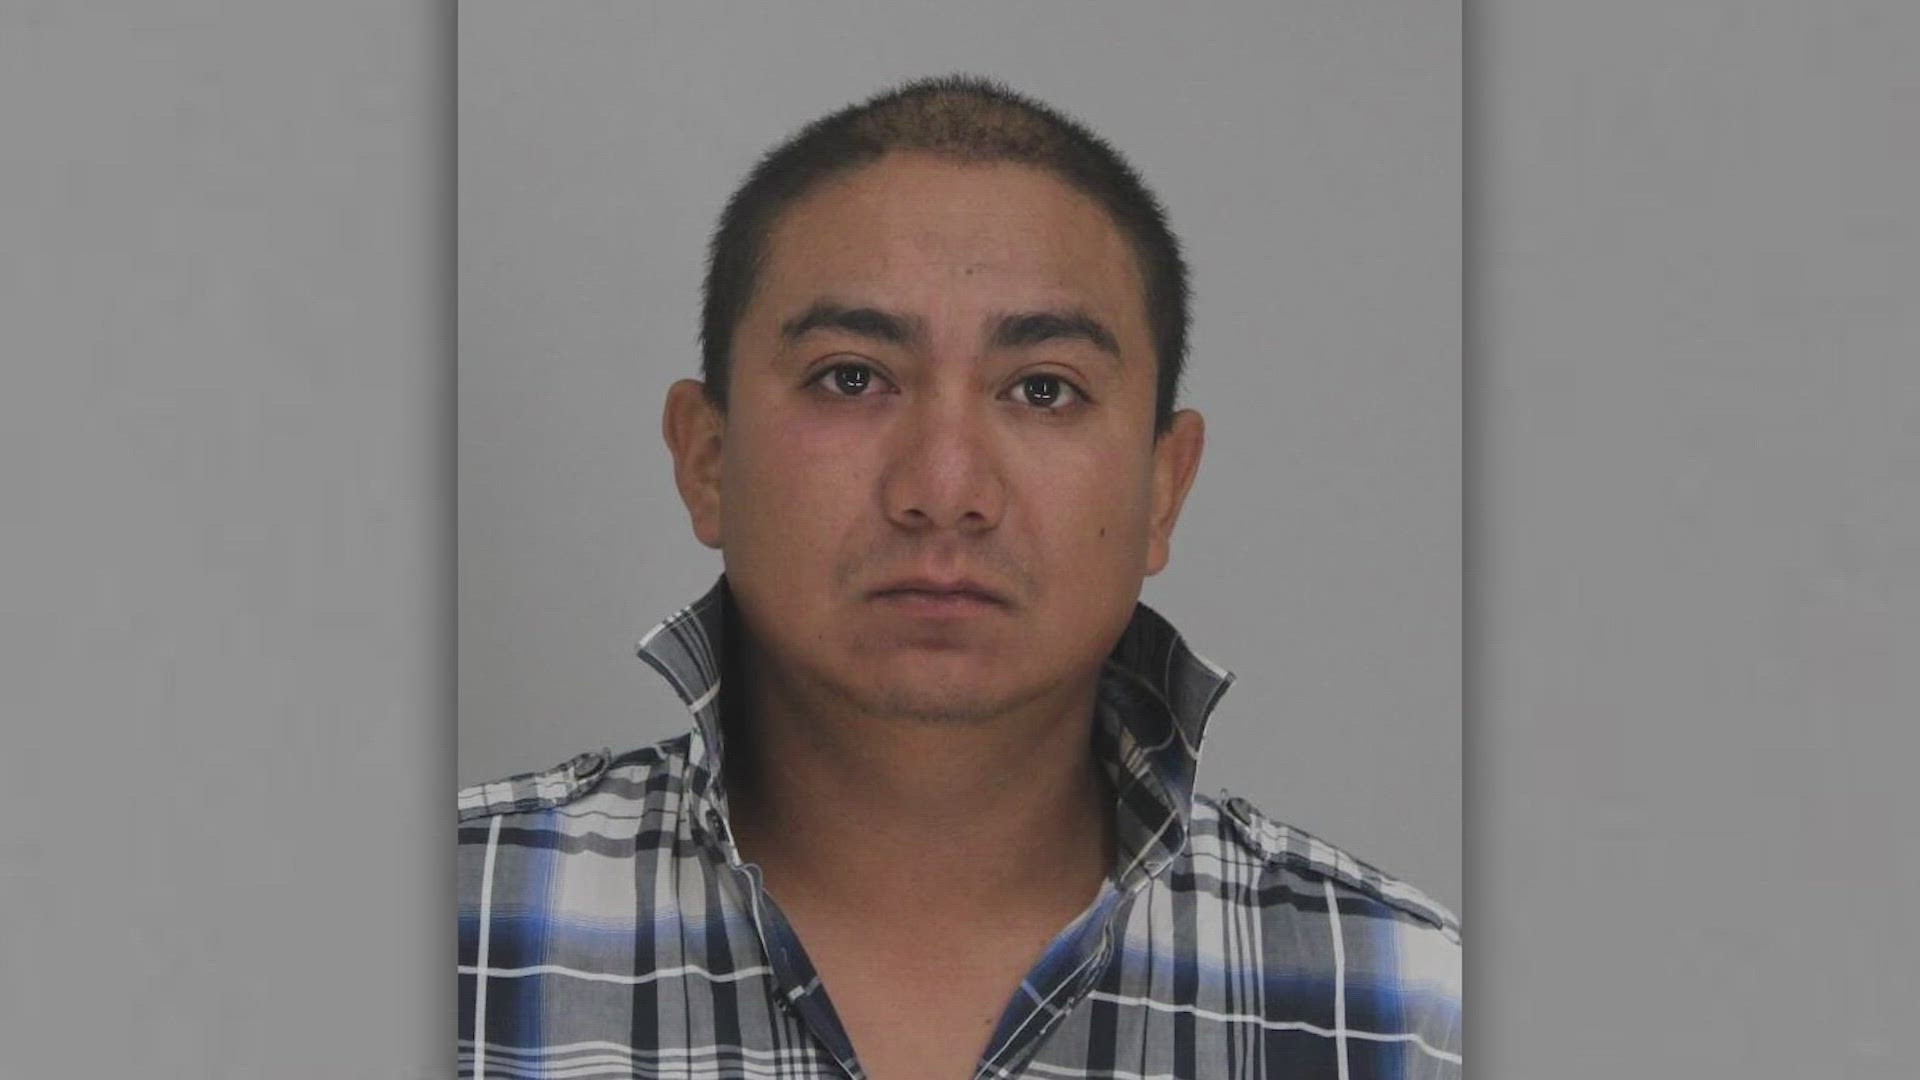 Oscar Sanchez Garcia was charged with three counts of murder.